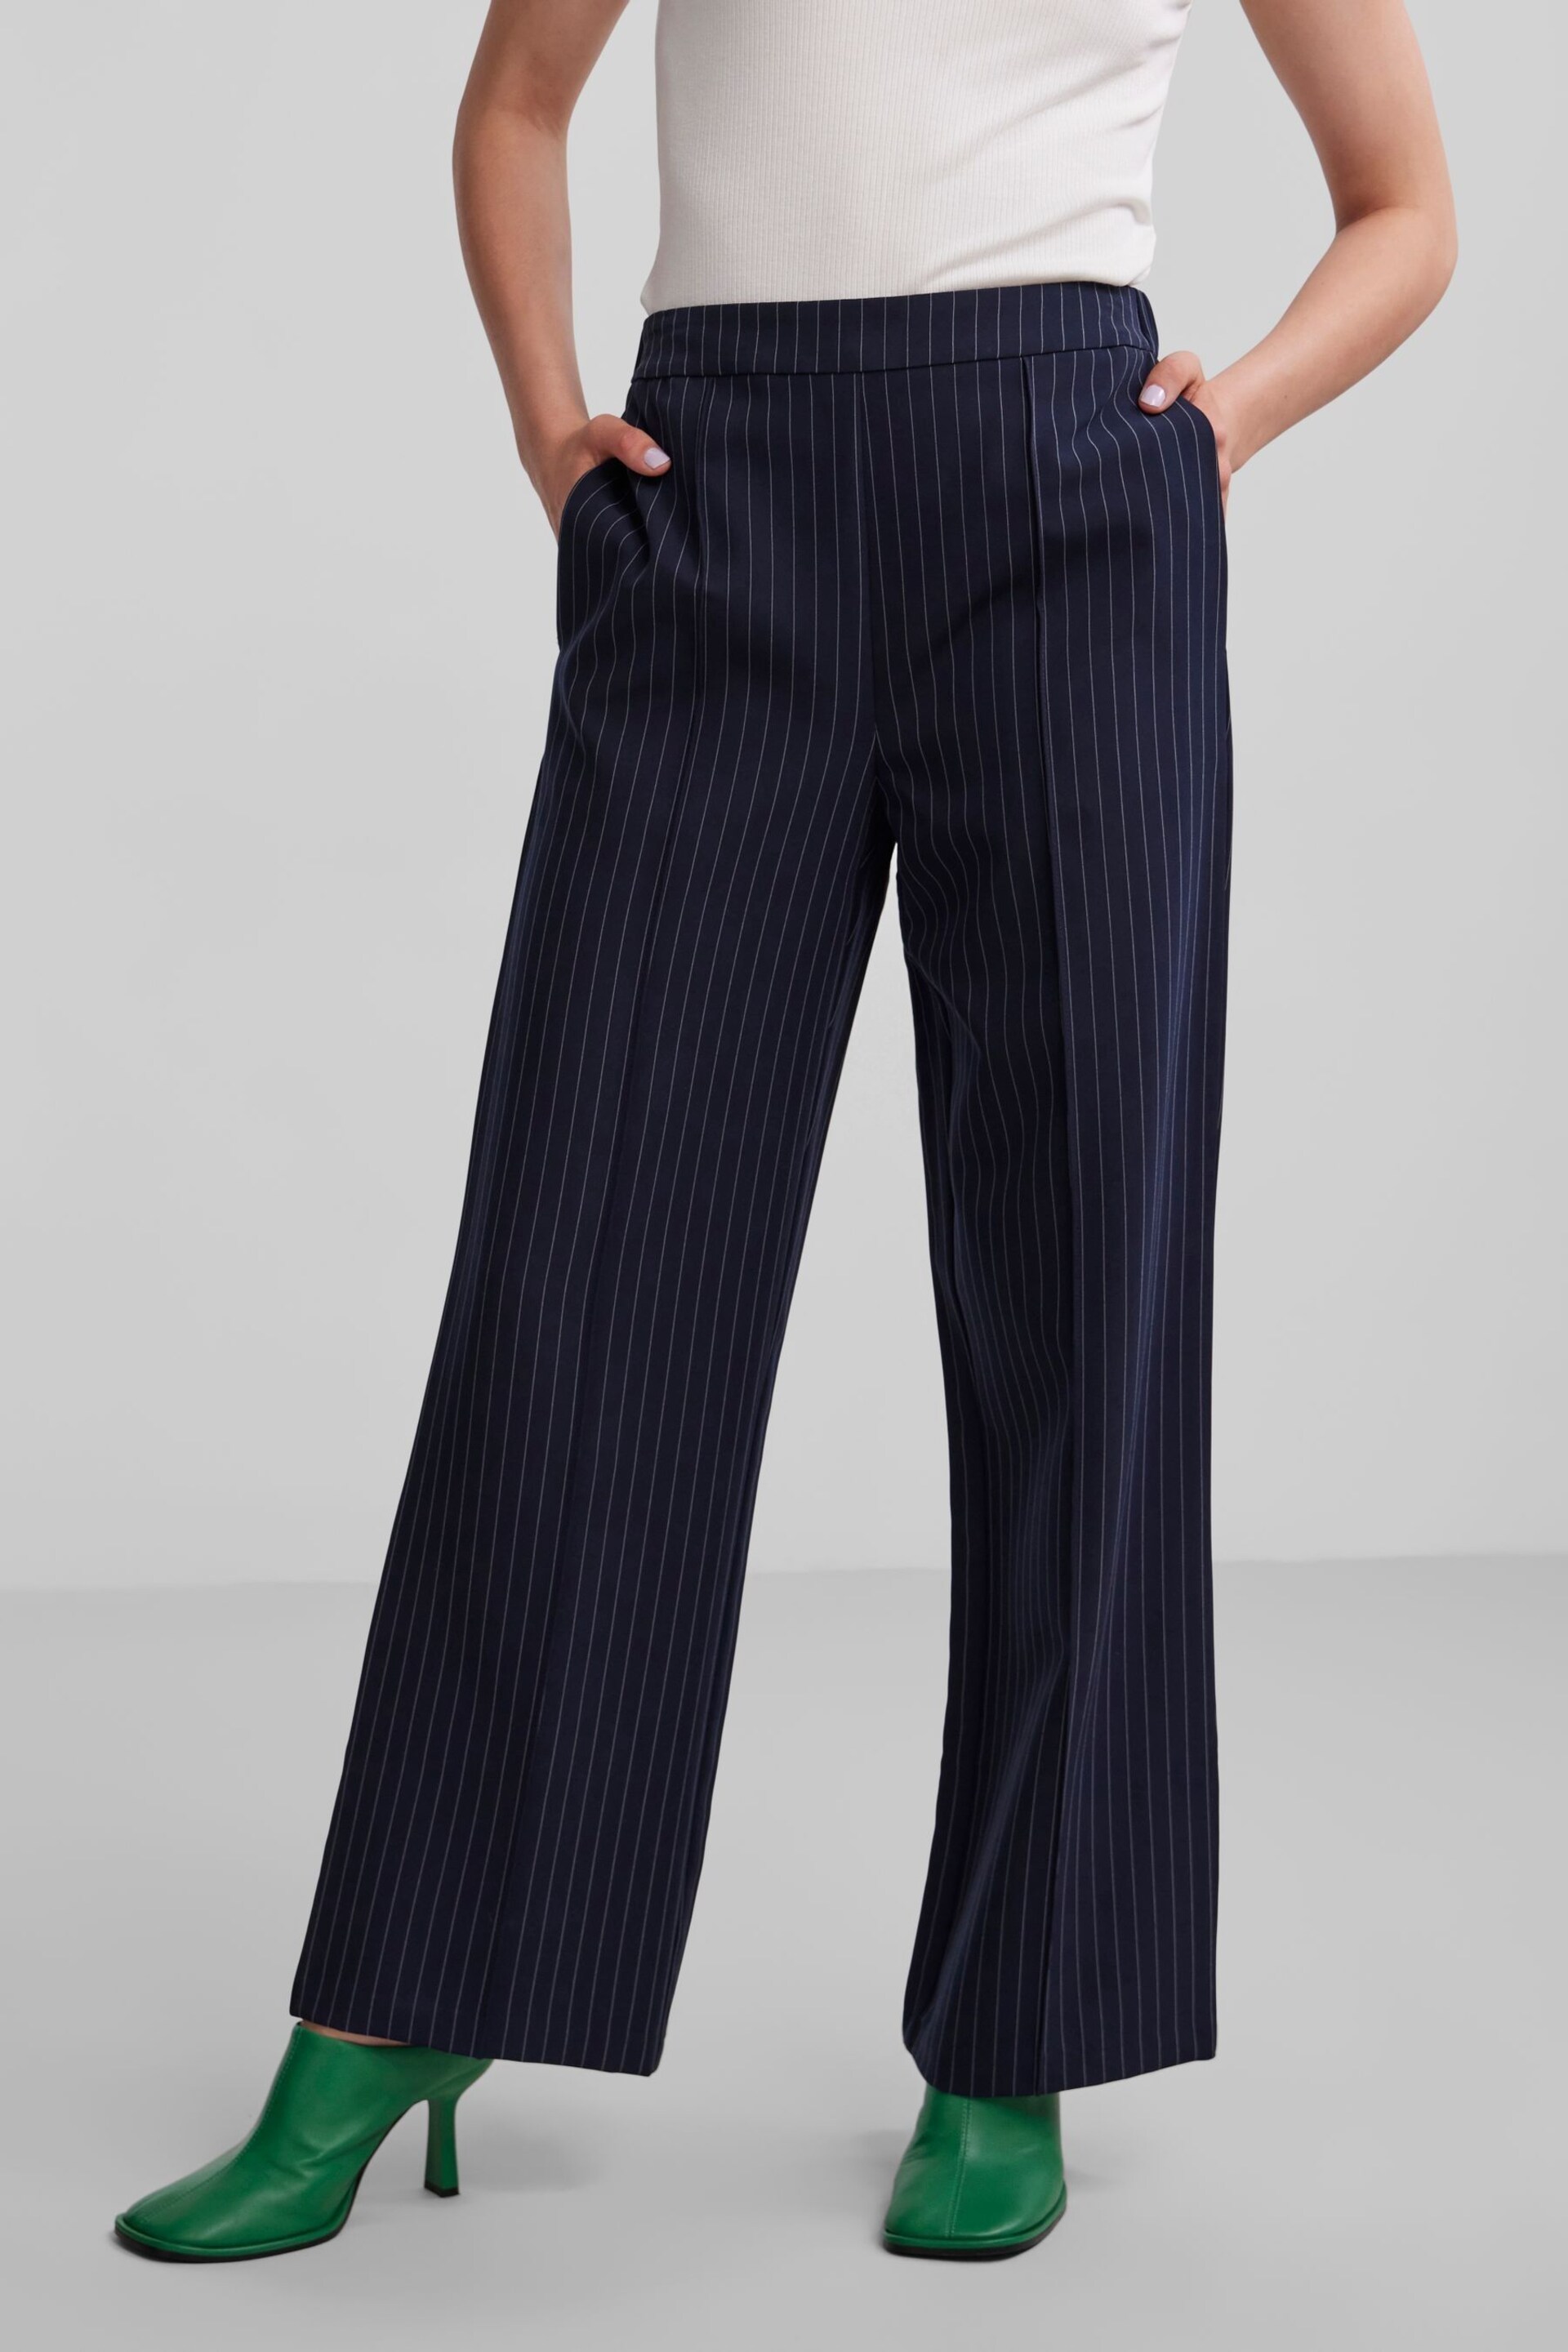 PIECES Blue Pinstripe Wide Leg Stretch Tailored Trousers - Image 1 of 5